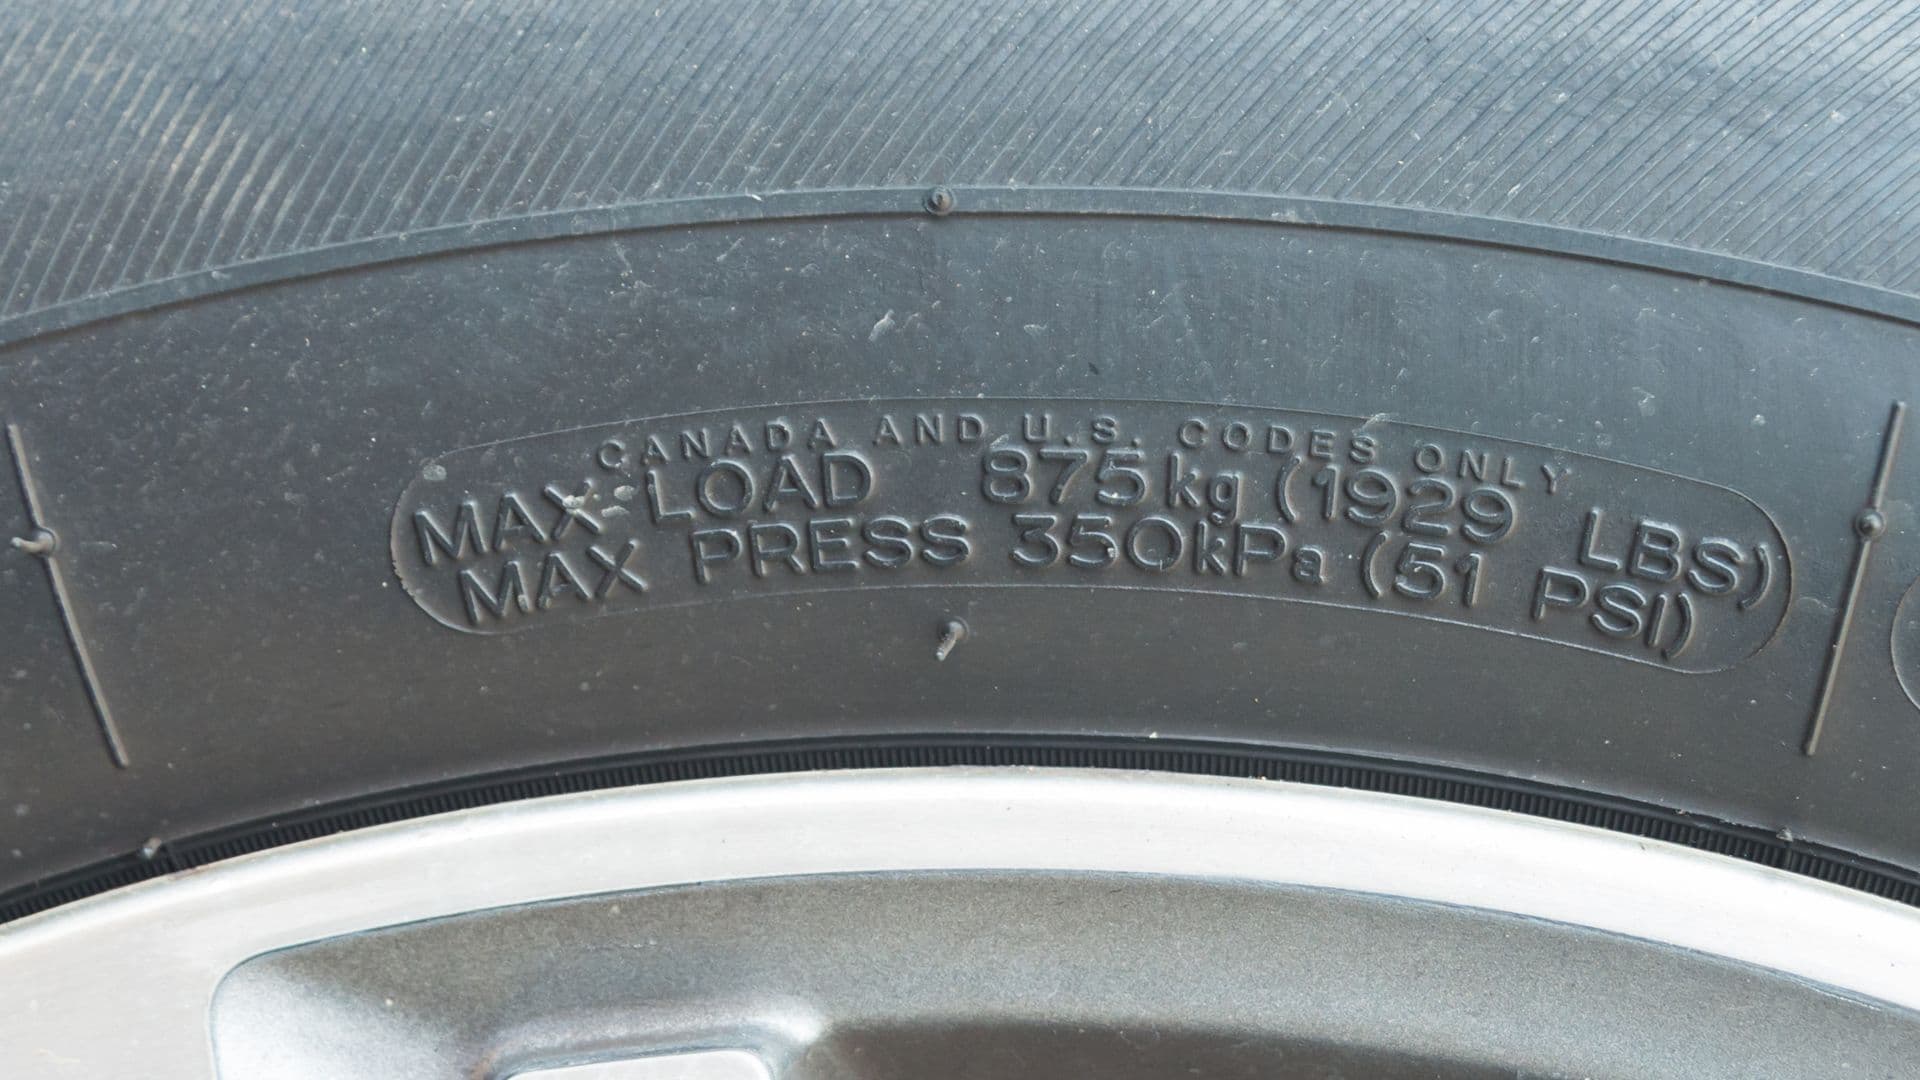 Tire load index. What is it and how to read it?